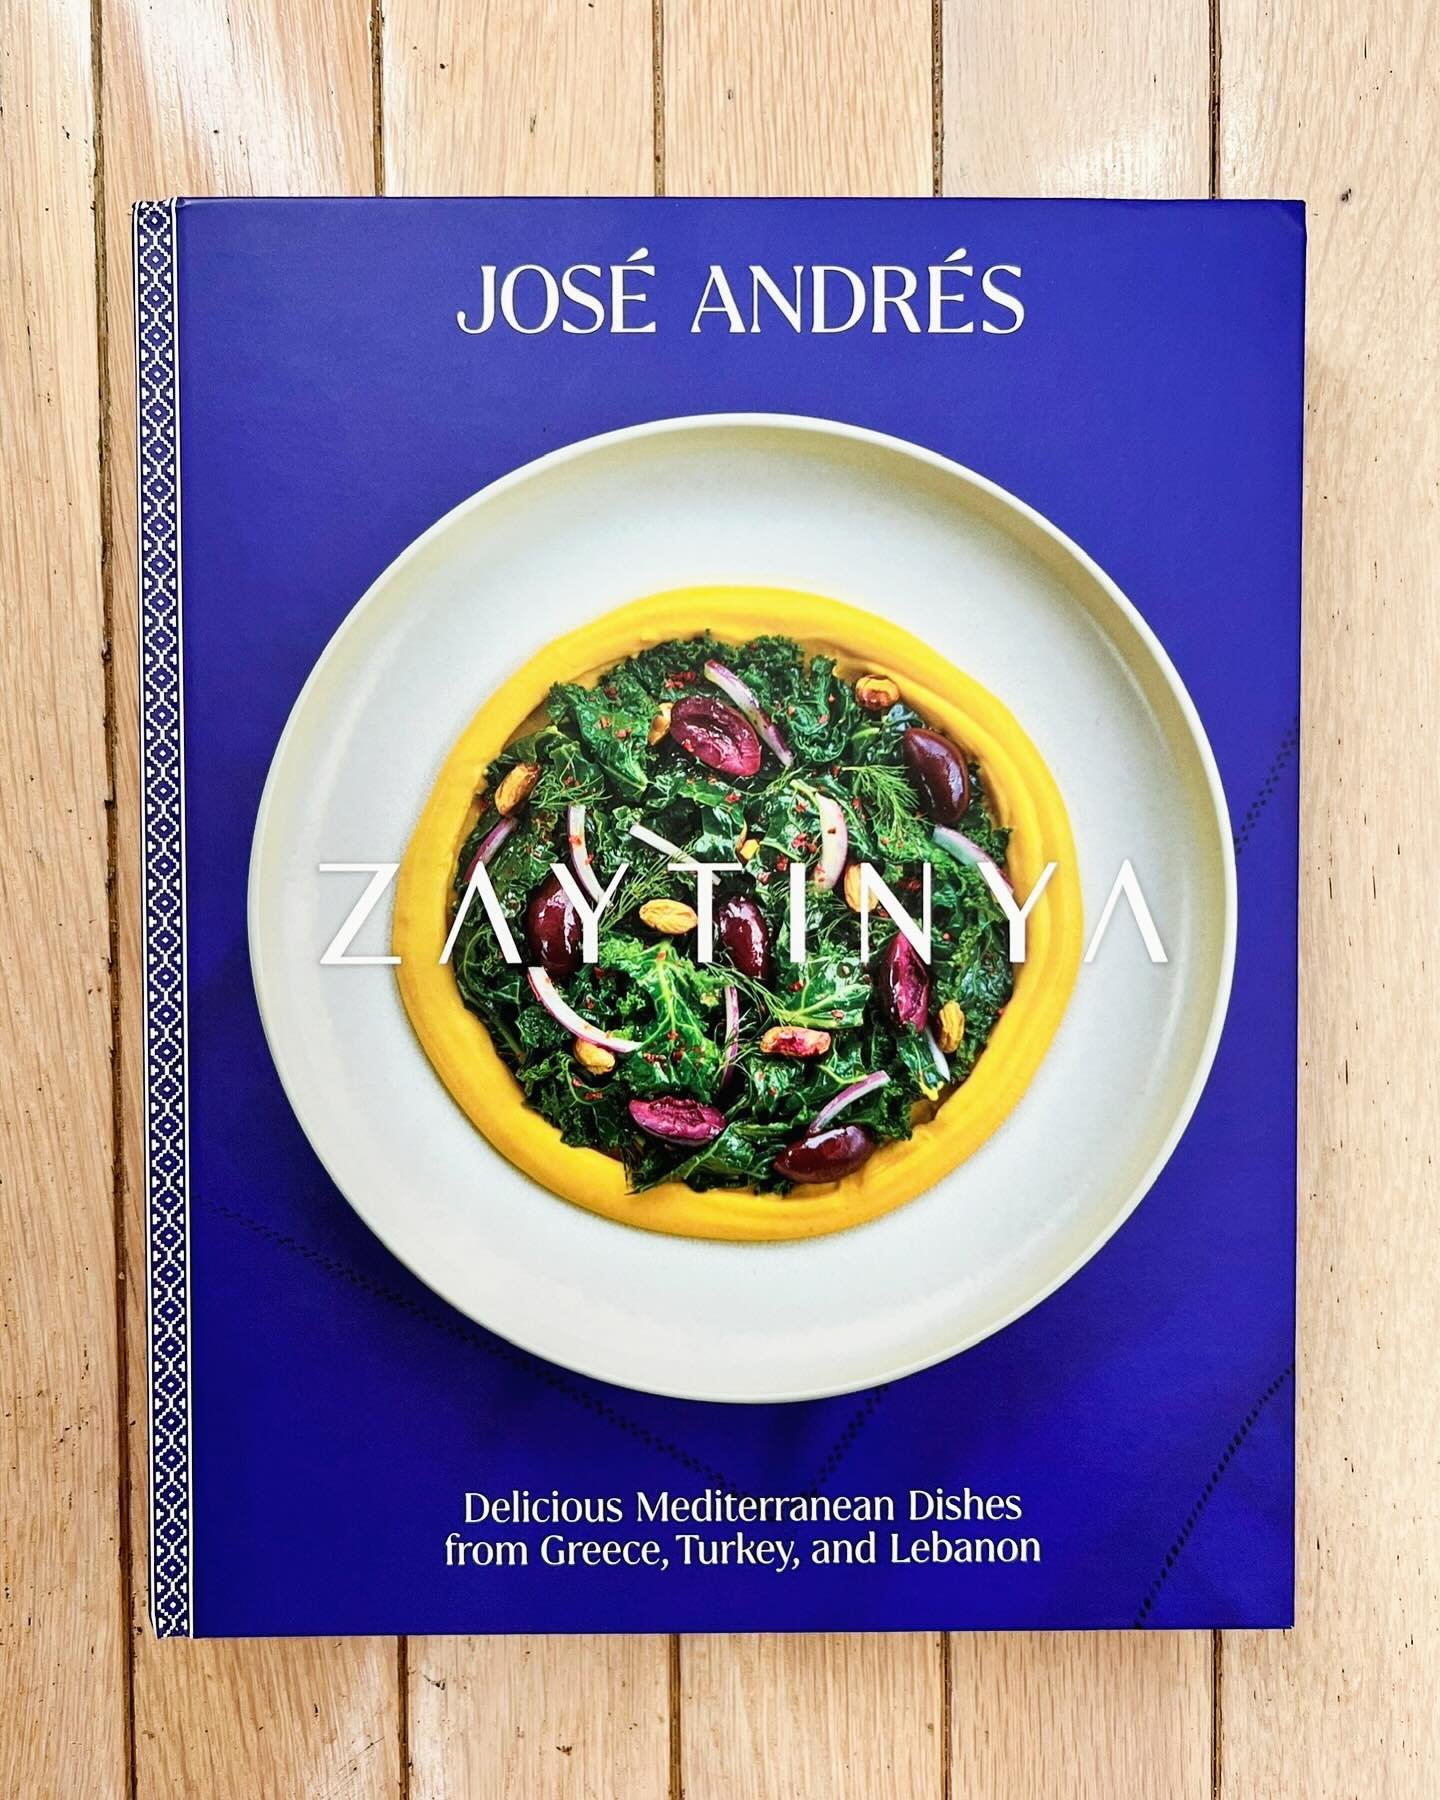 Thank you @eccobooks for the gifted copy of @chefjoseandres latest cookbook, ZAYTINYA: Delicious Mediterranean Dishes from Greece, Turkey, and Lebanon. For over 20 years, @zaytinya restaurant has been a premier dining destination in DC. It&rsquo;s on